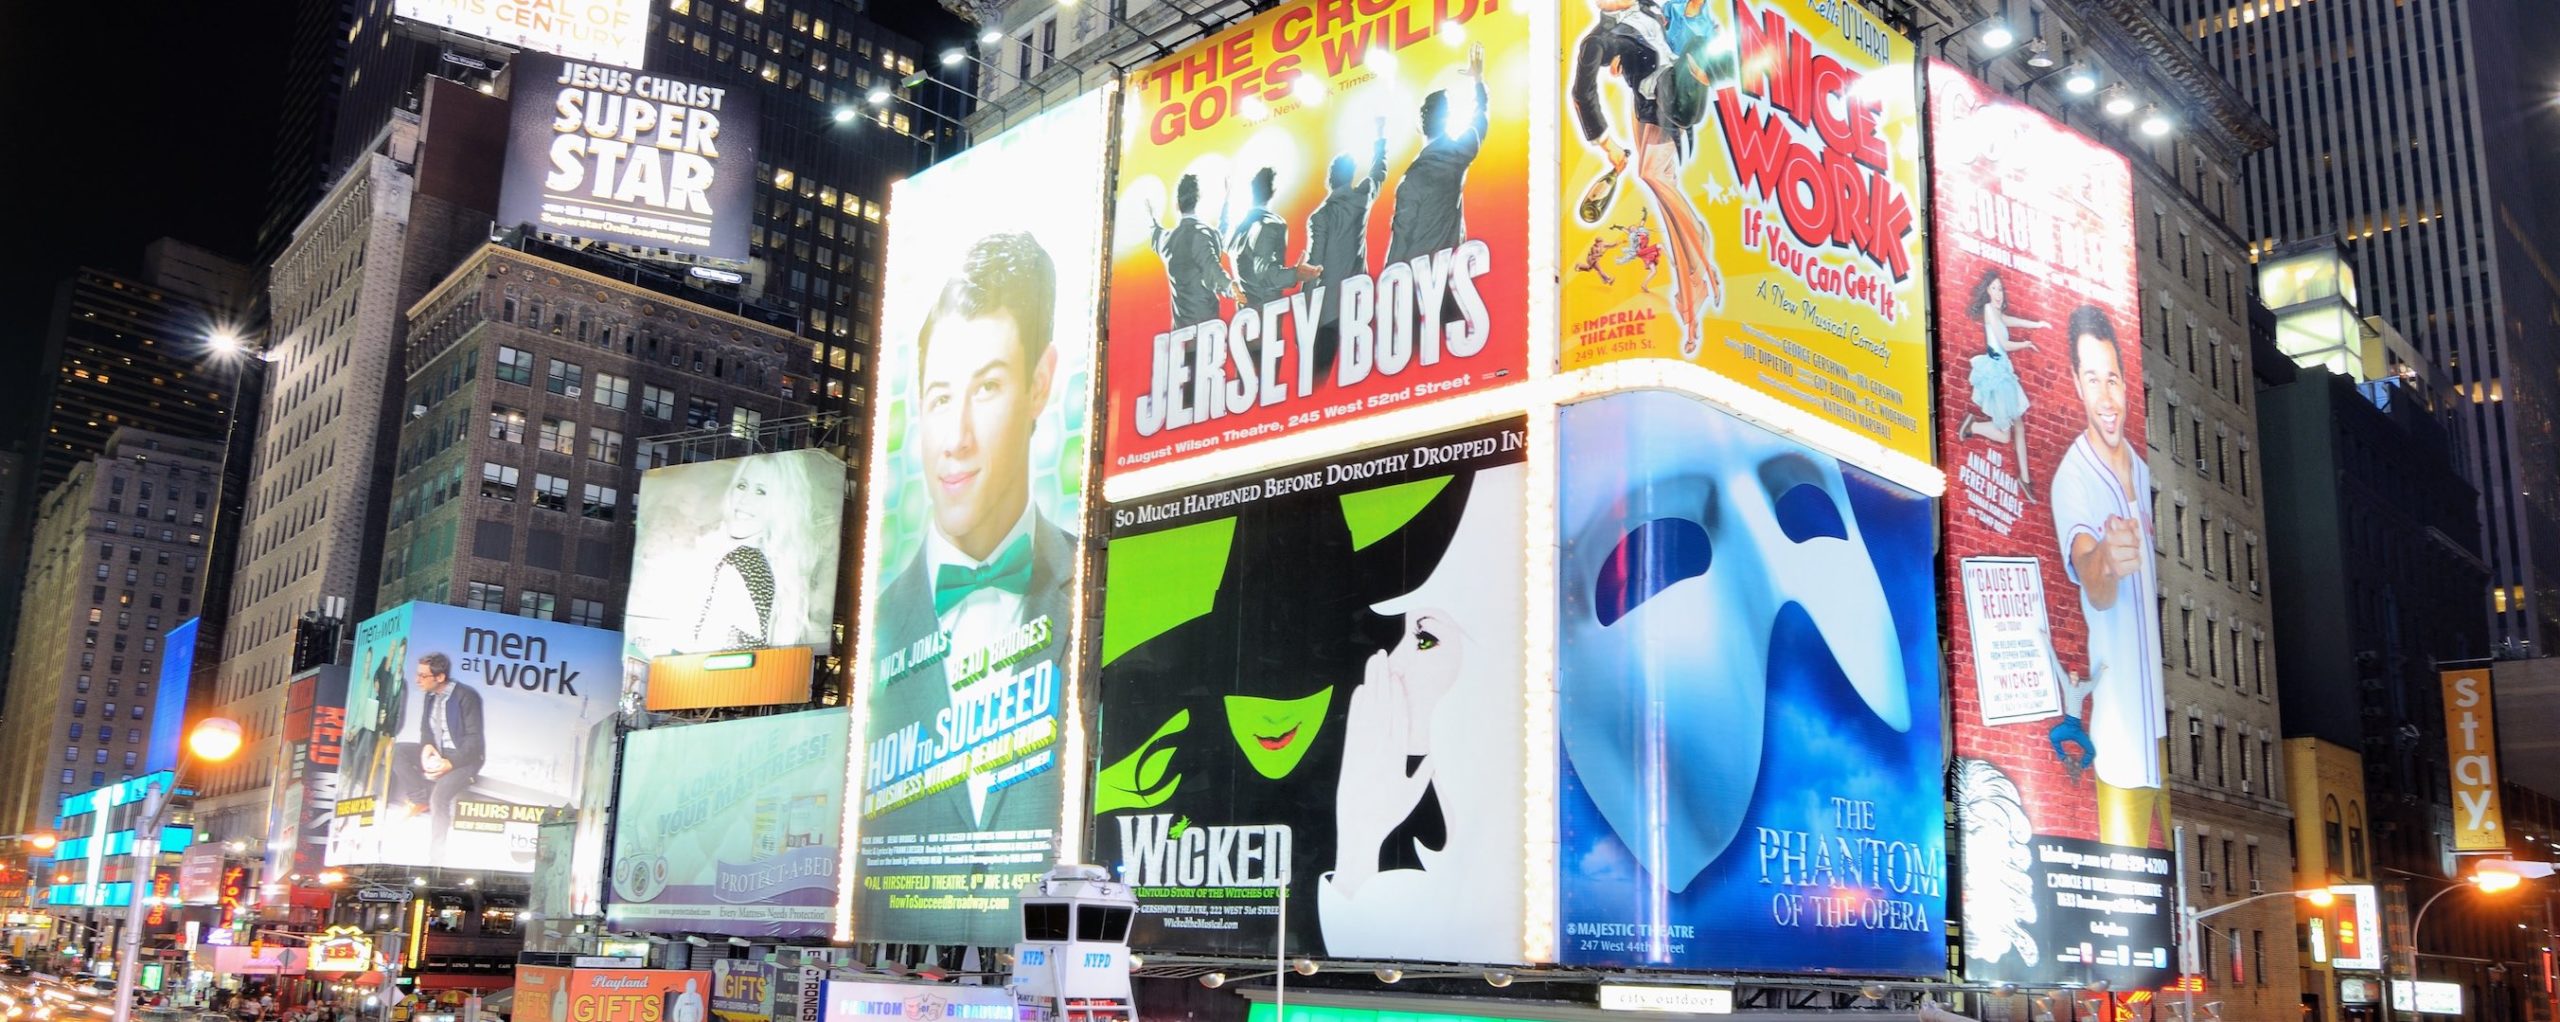 Vancouver Tribute To Broadway Musicals